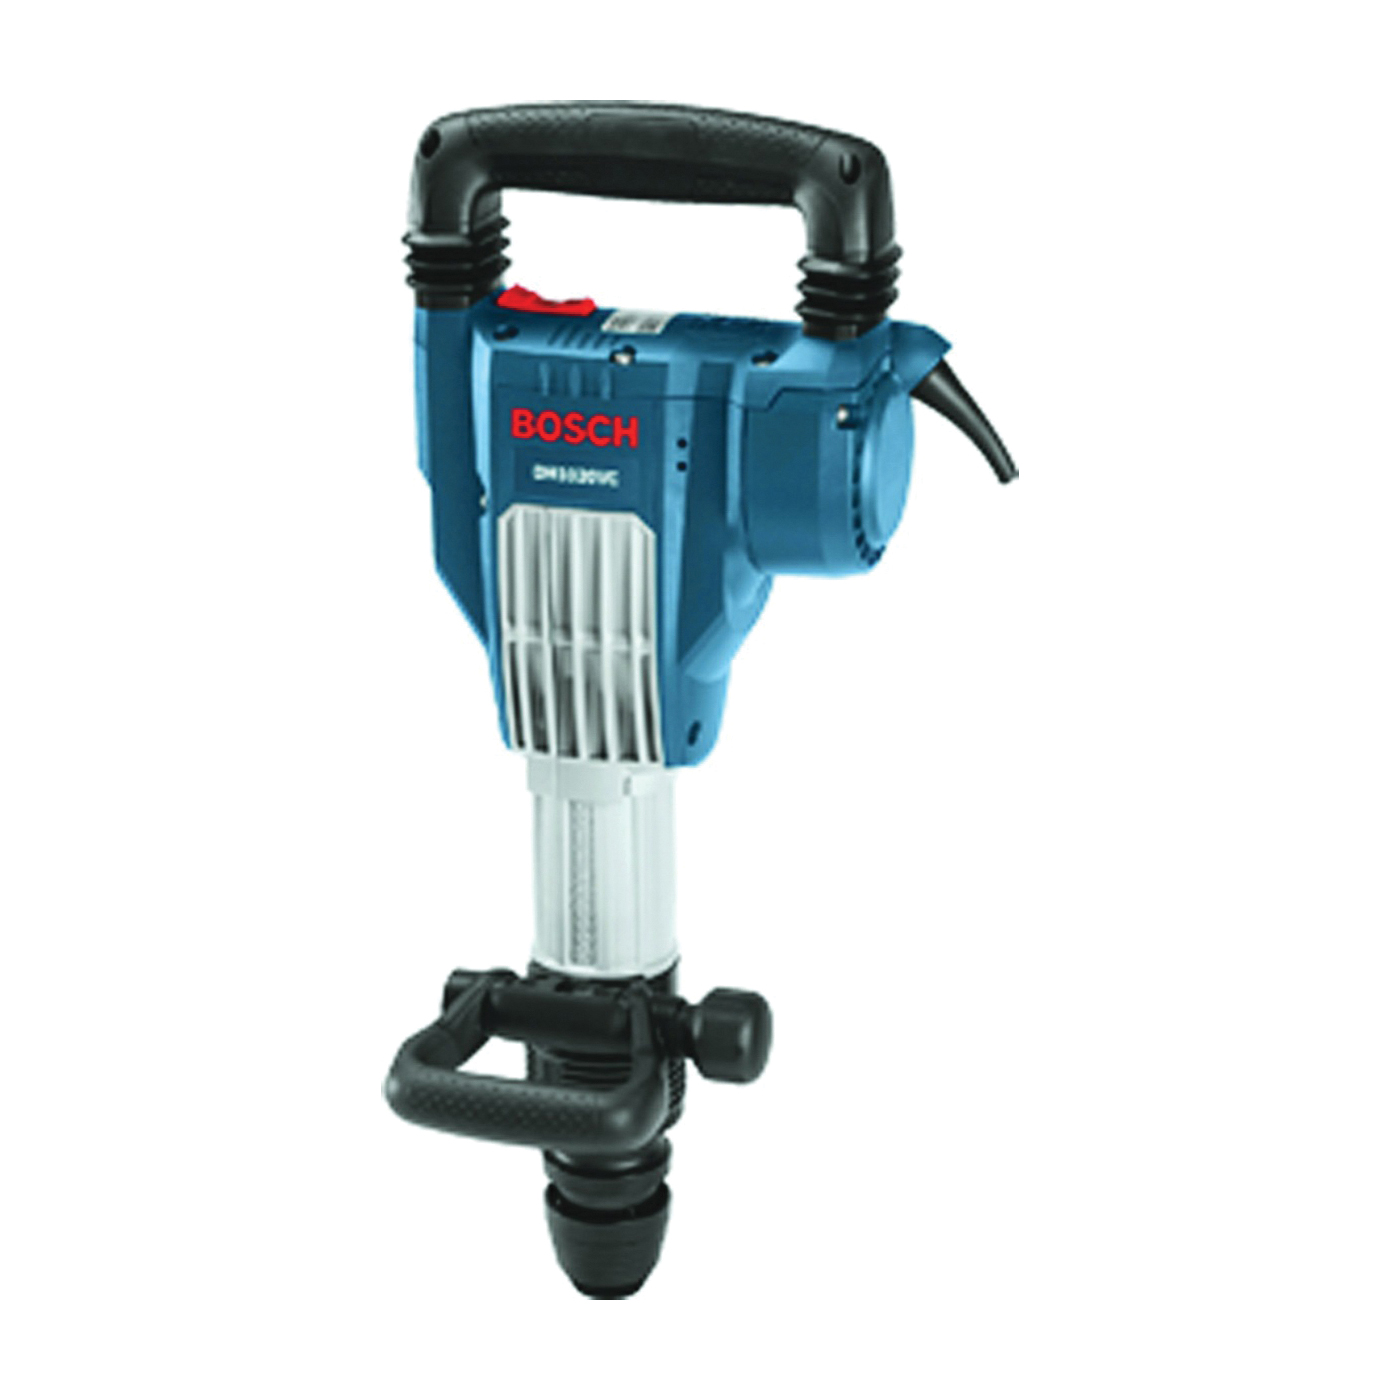 DH1020VC Demolition Hammer, 15 A, 1-1/8 in Chuck, Keyless, SDS-Max Chuck, 850 to 1800 bpm, 8 ft L Cord